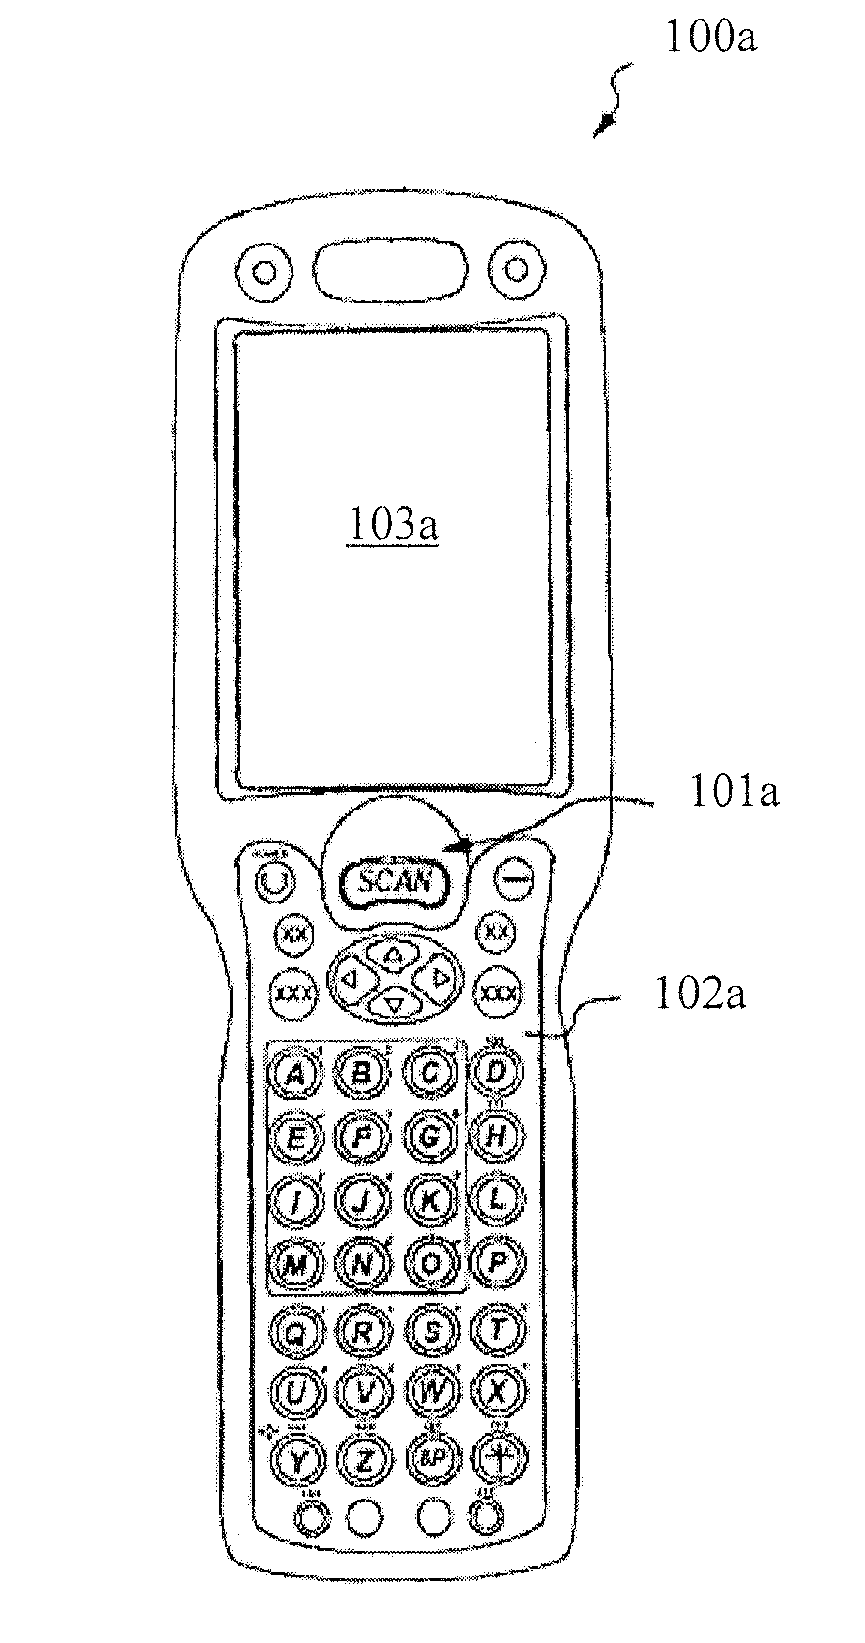 Low power multi-core decoder system and method